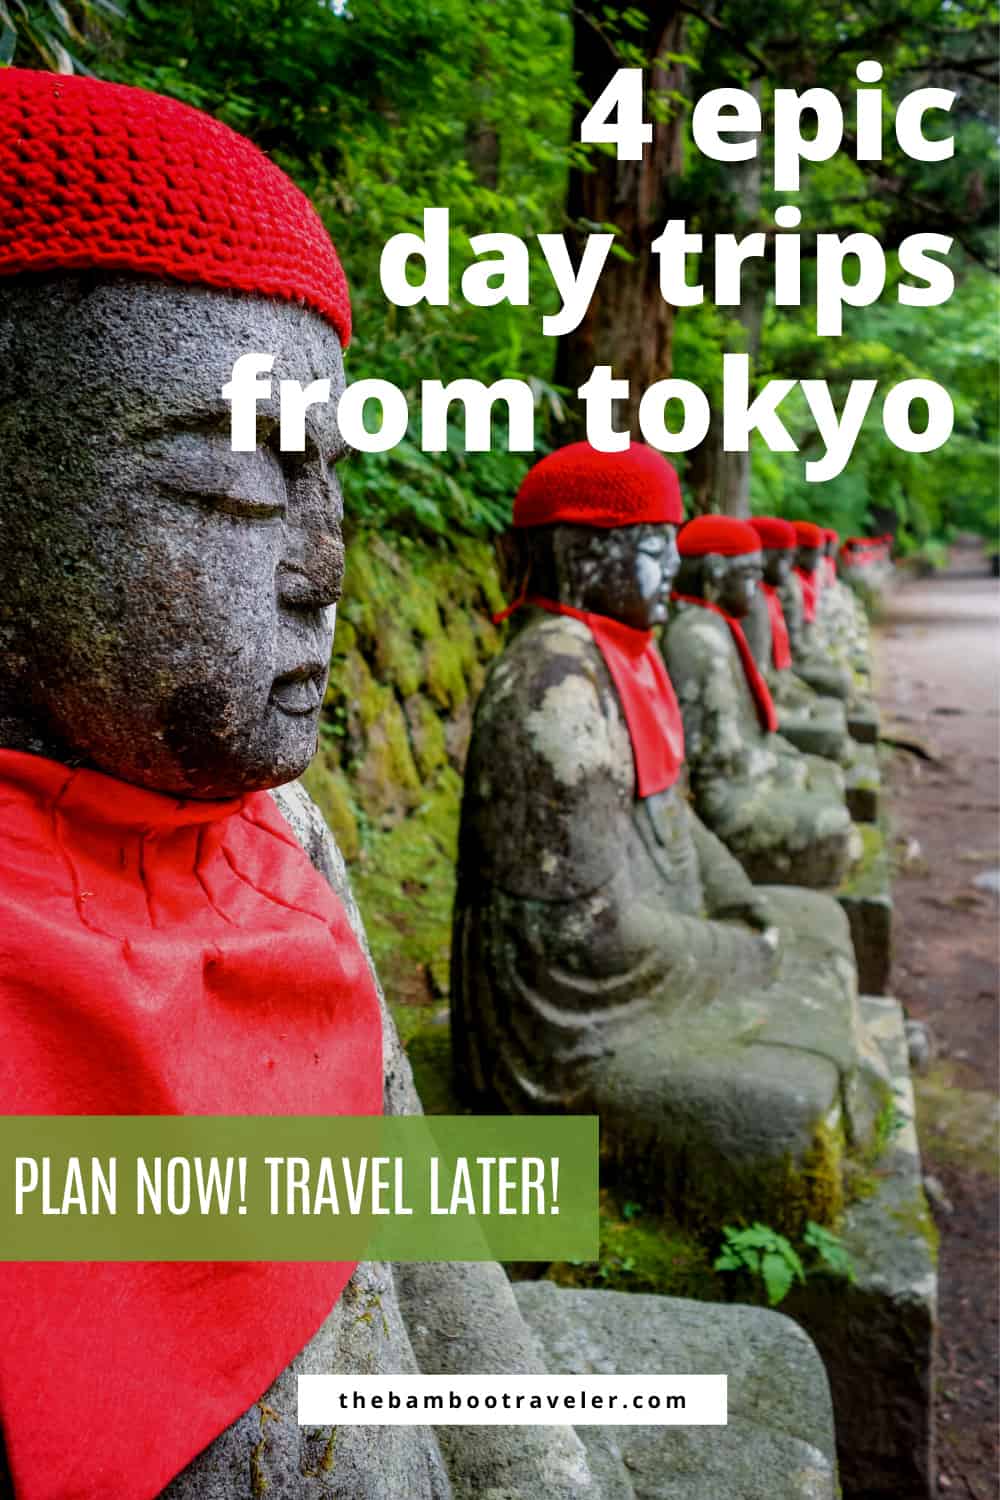 a row of Japanese statues wearing a red cap and bib